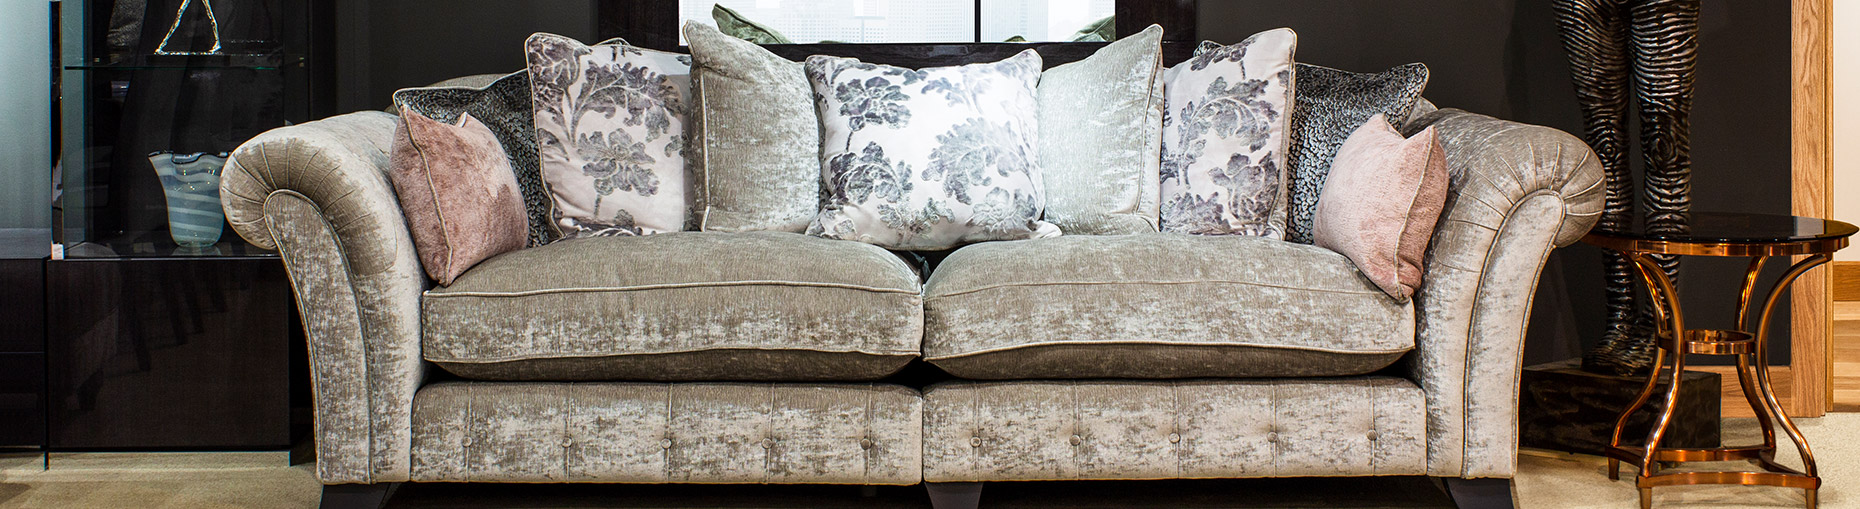 Plush sofa collection by Alstons at Forrest Furnishing